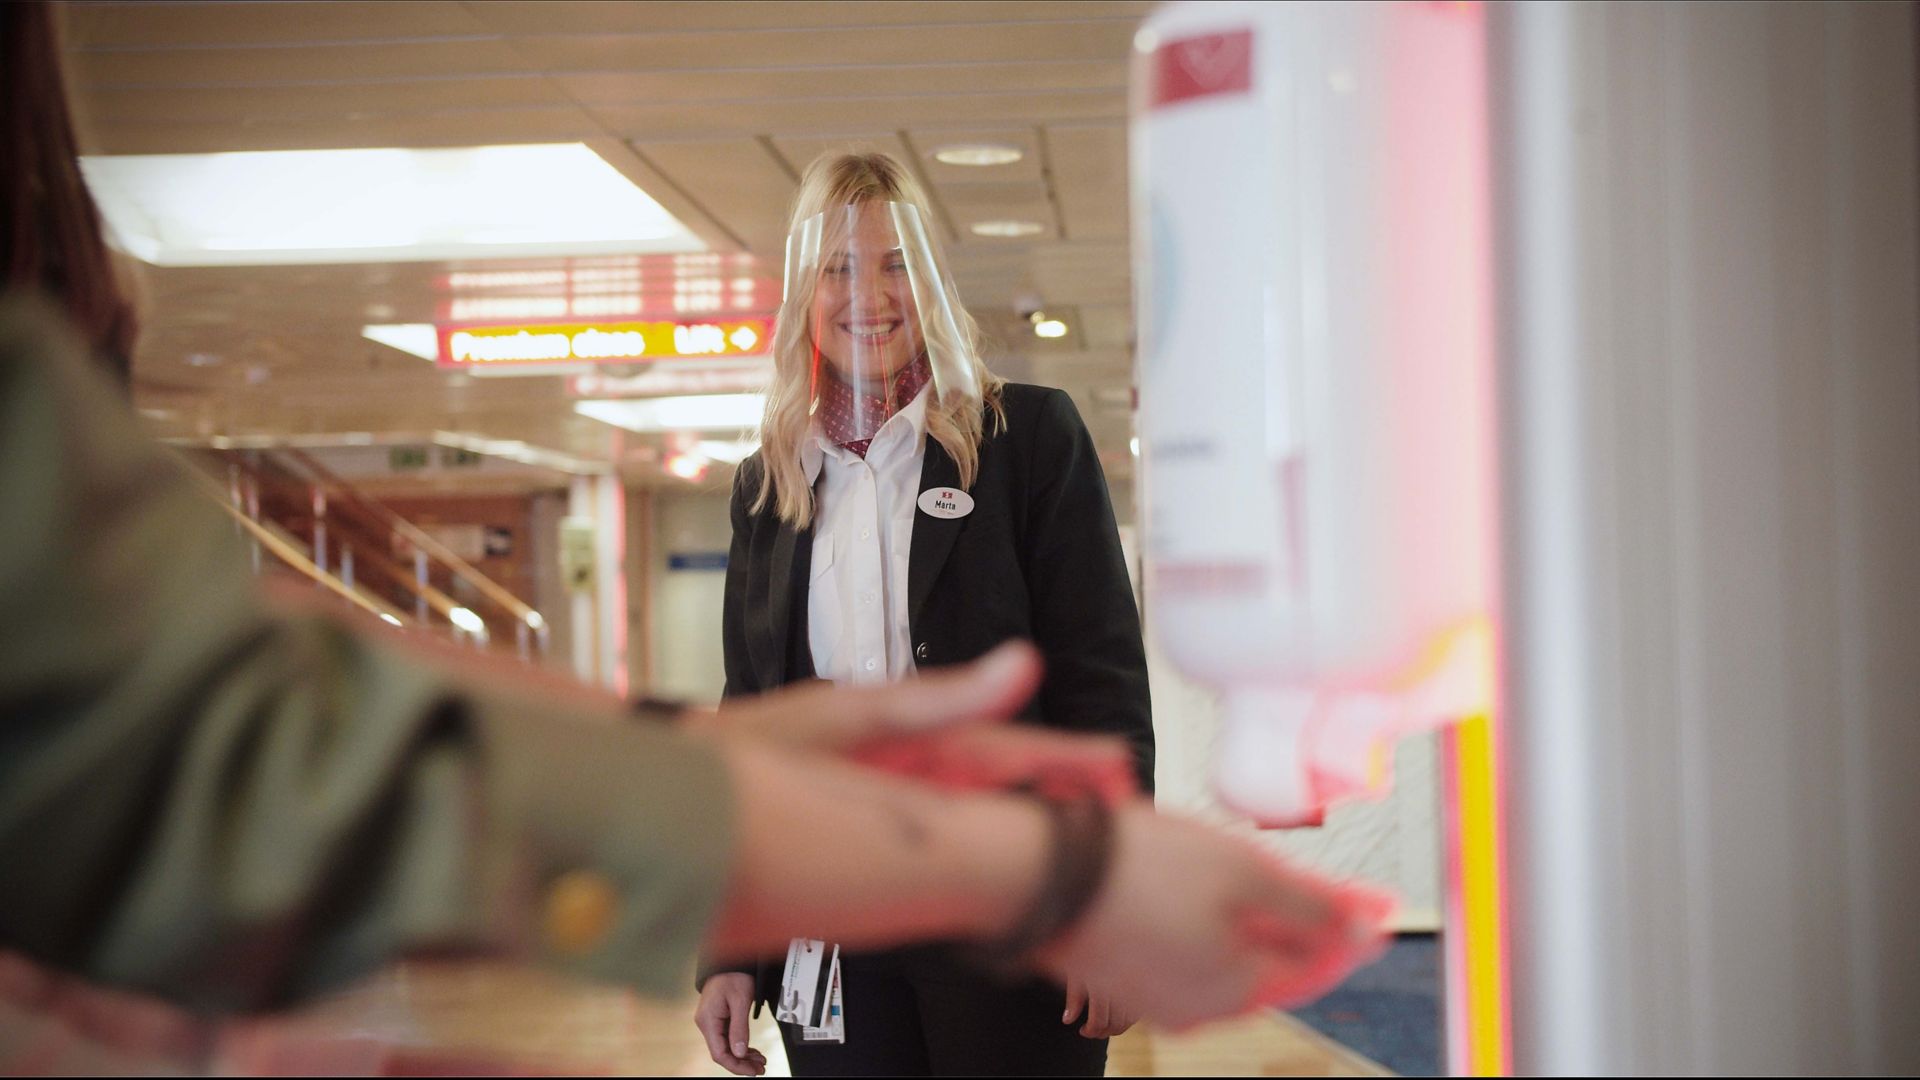 Smiling Stena Line staff member watching a passenger use the hand sanitiser dispenser onboard a ferry